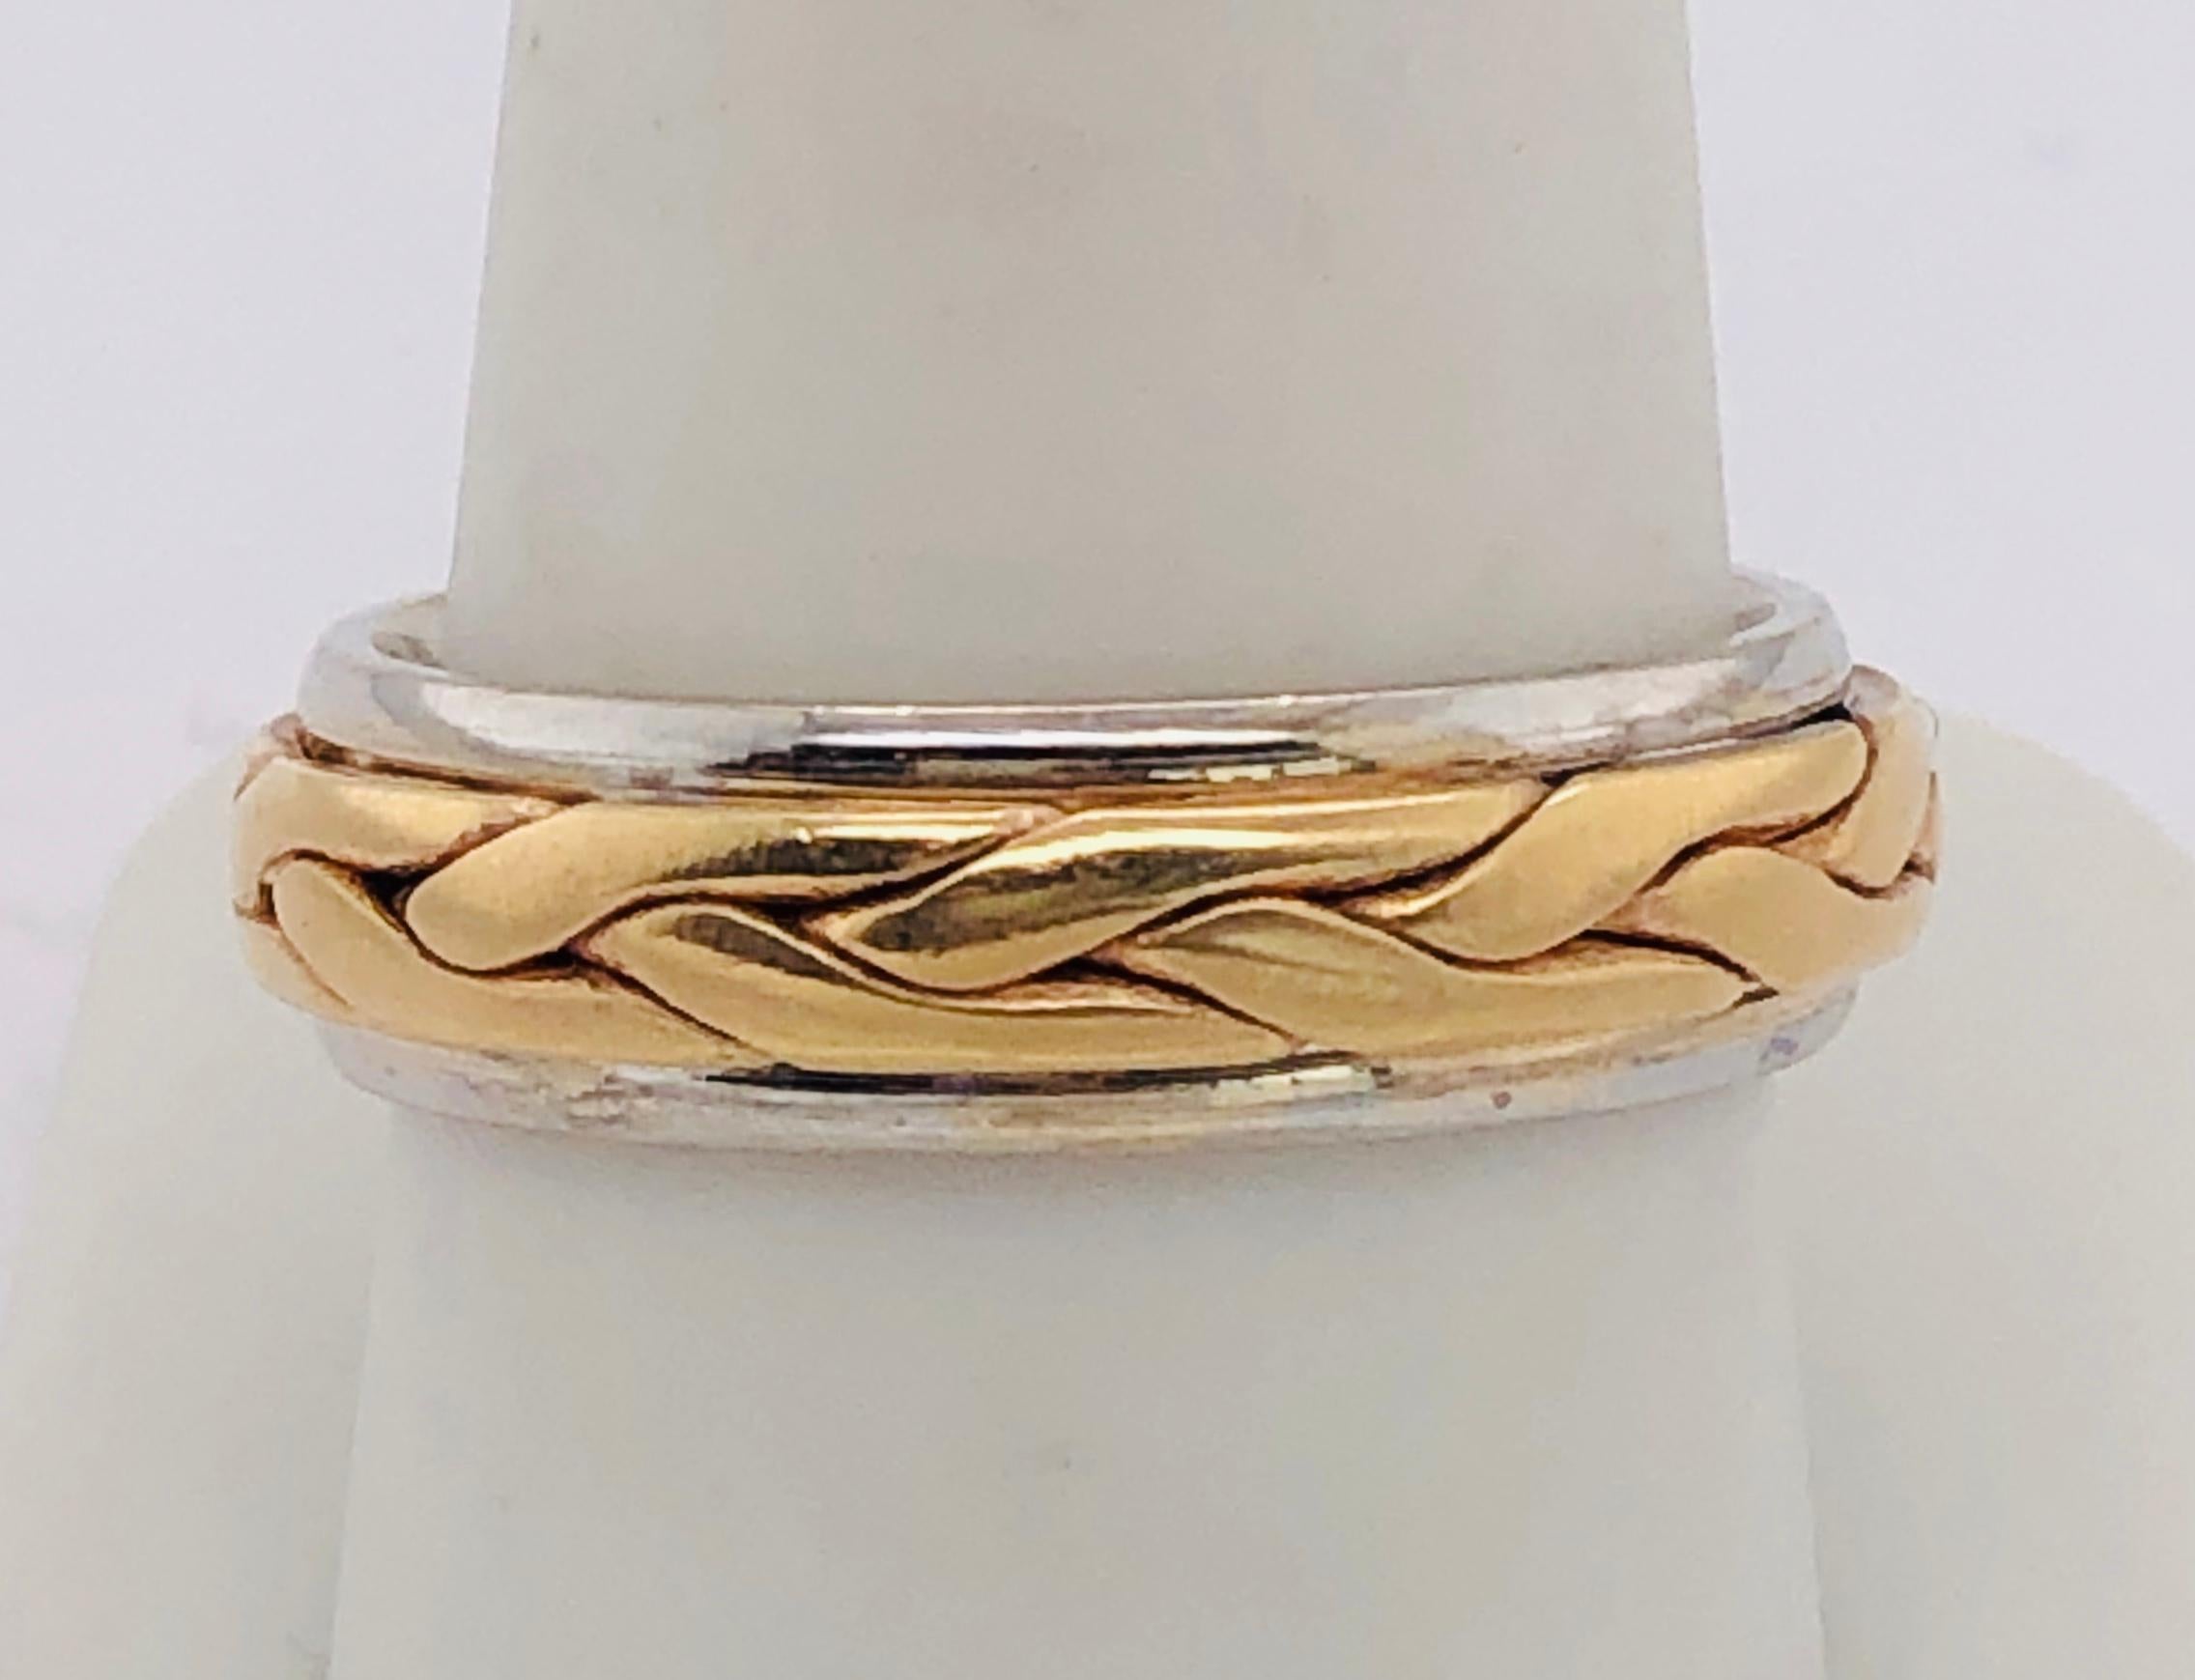 14Kt Two Tone Gold Braid Styled Band Ring
Size 10 
Change tag number to 223